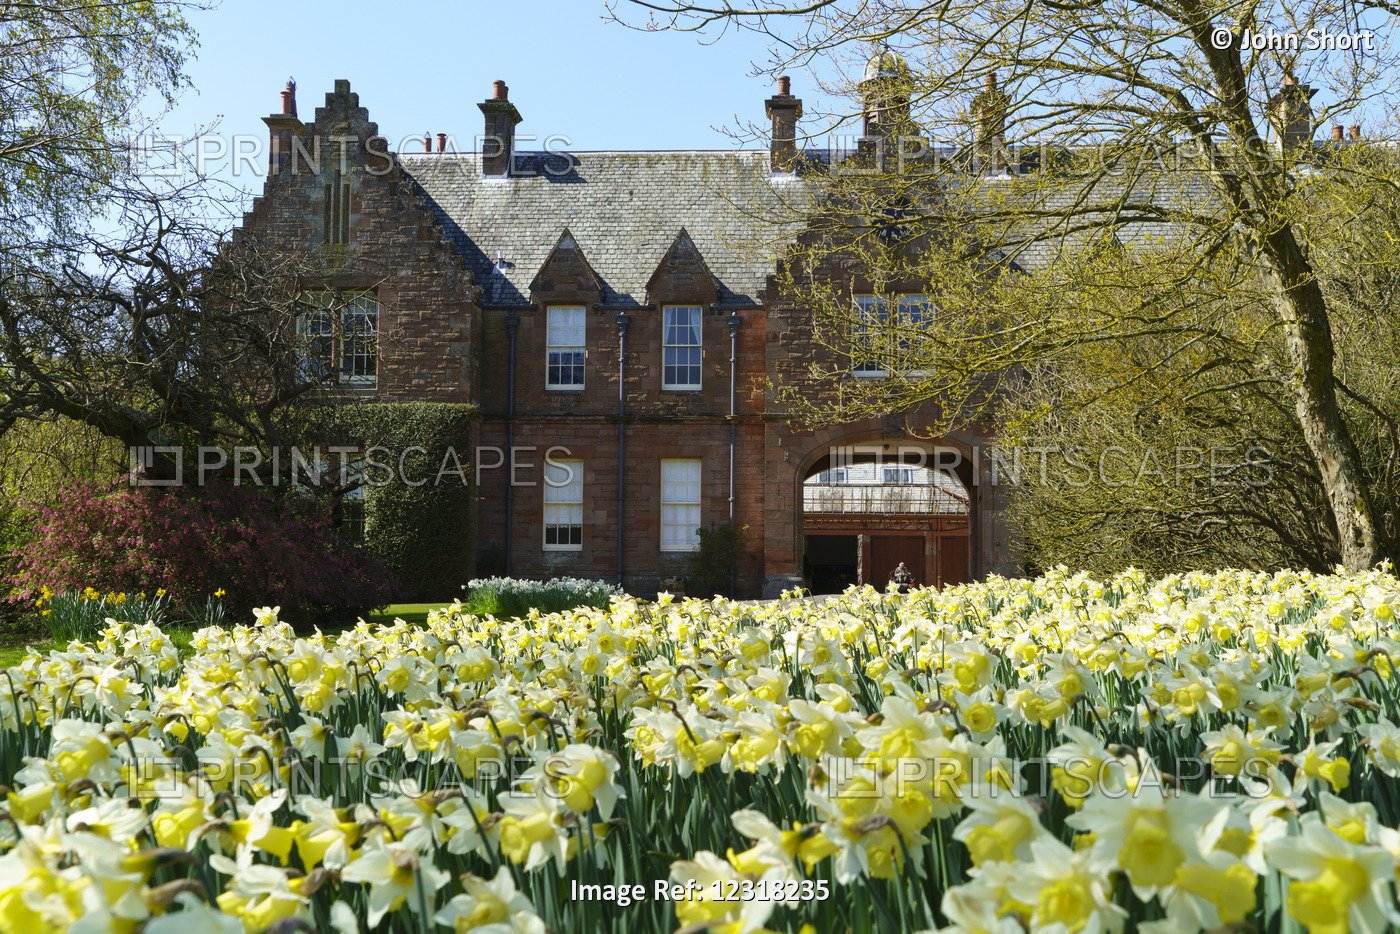 House With New Growth On Trees And Daffodils In The Foreground; Northumberland, ...